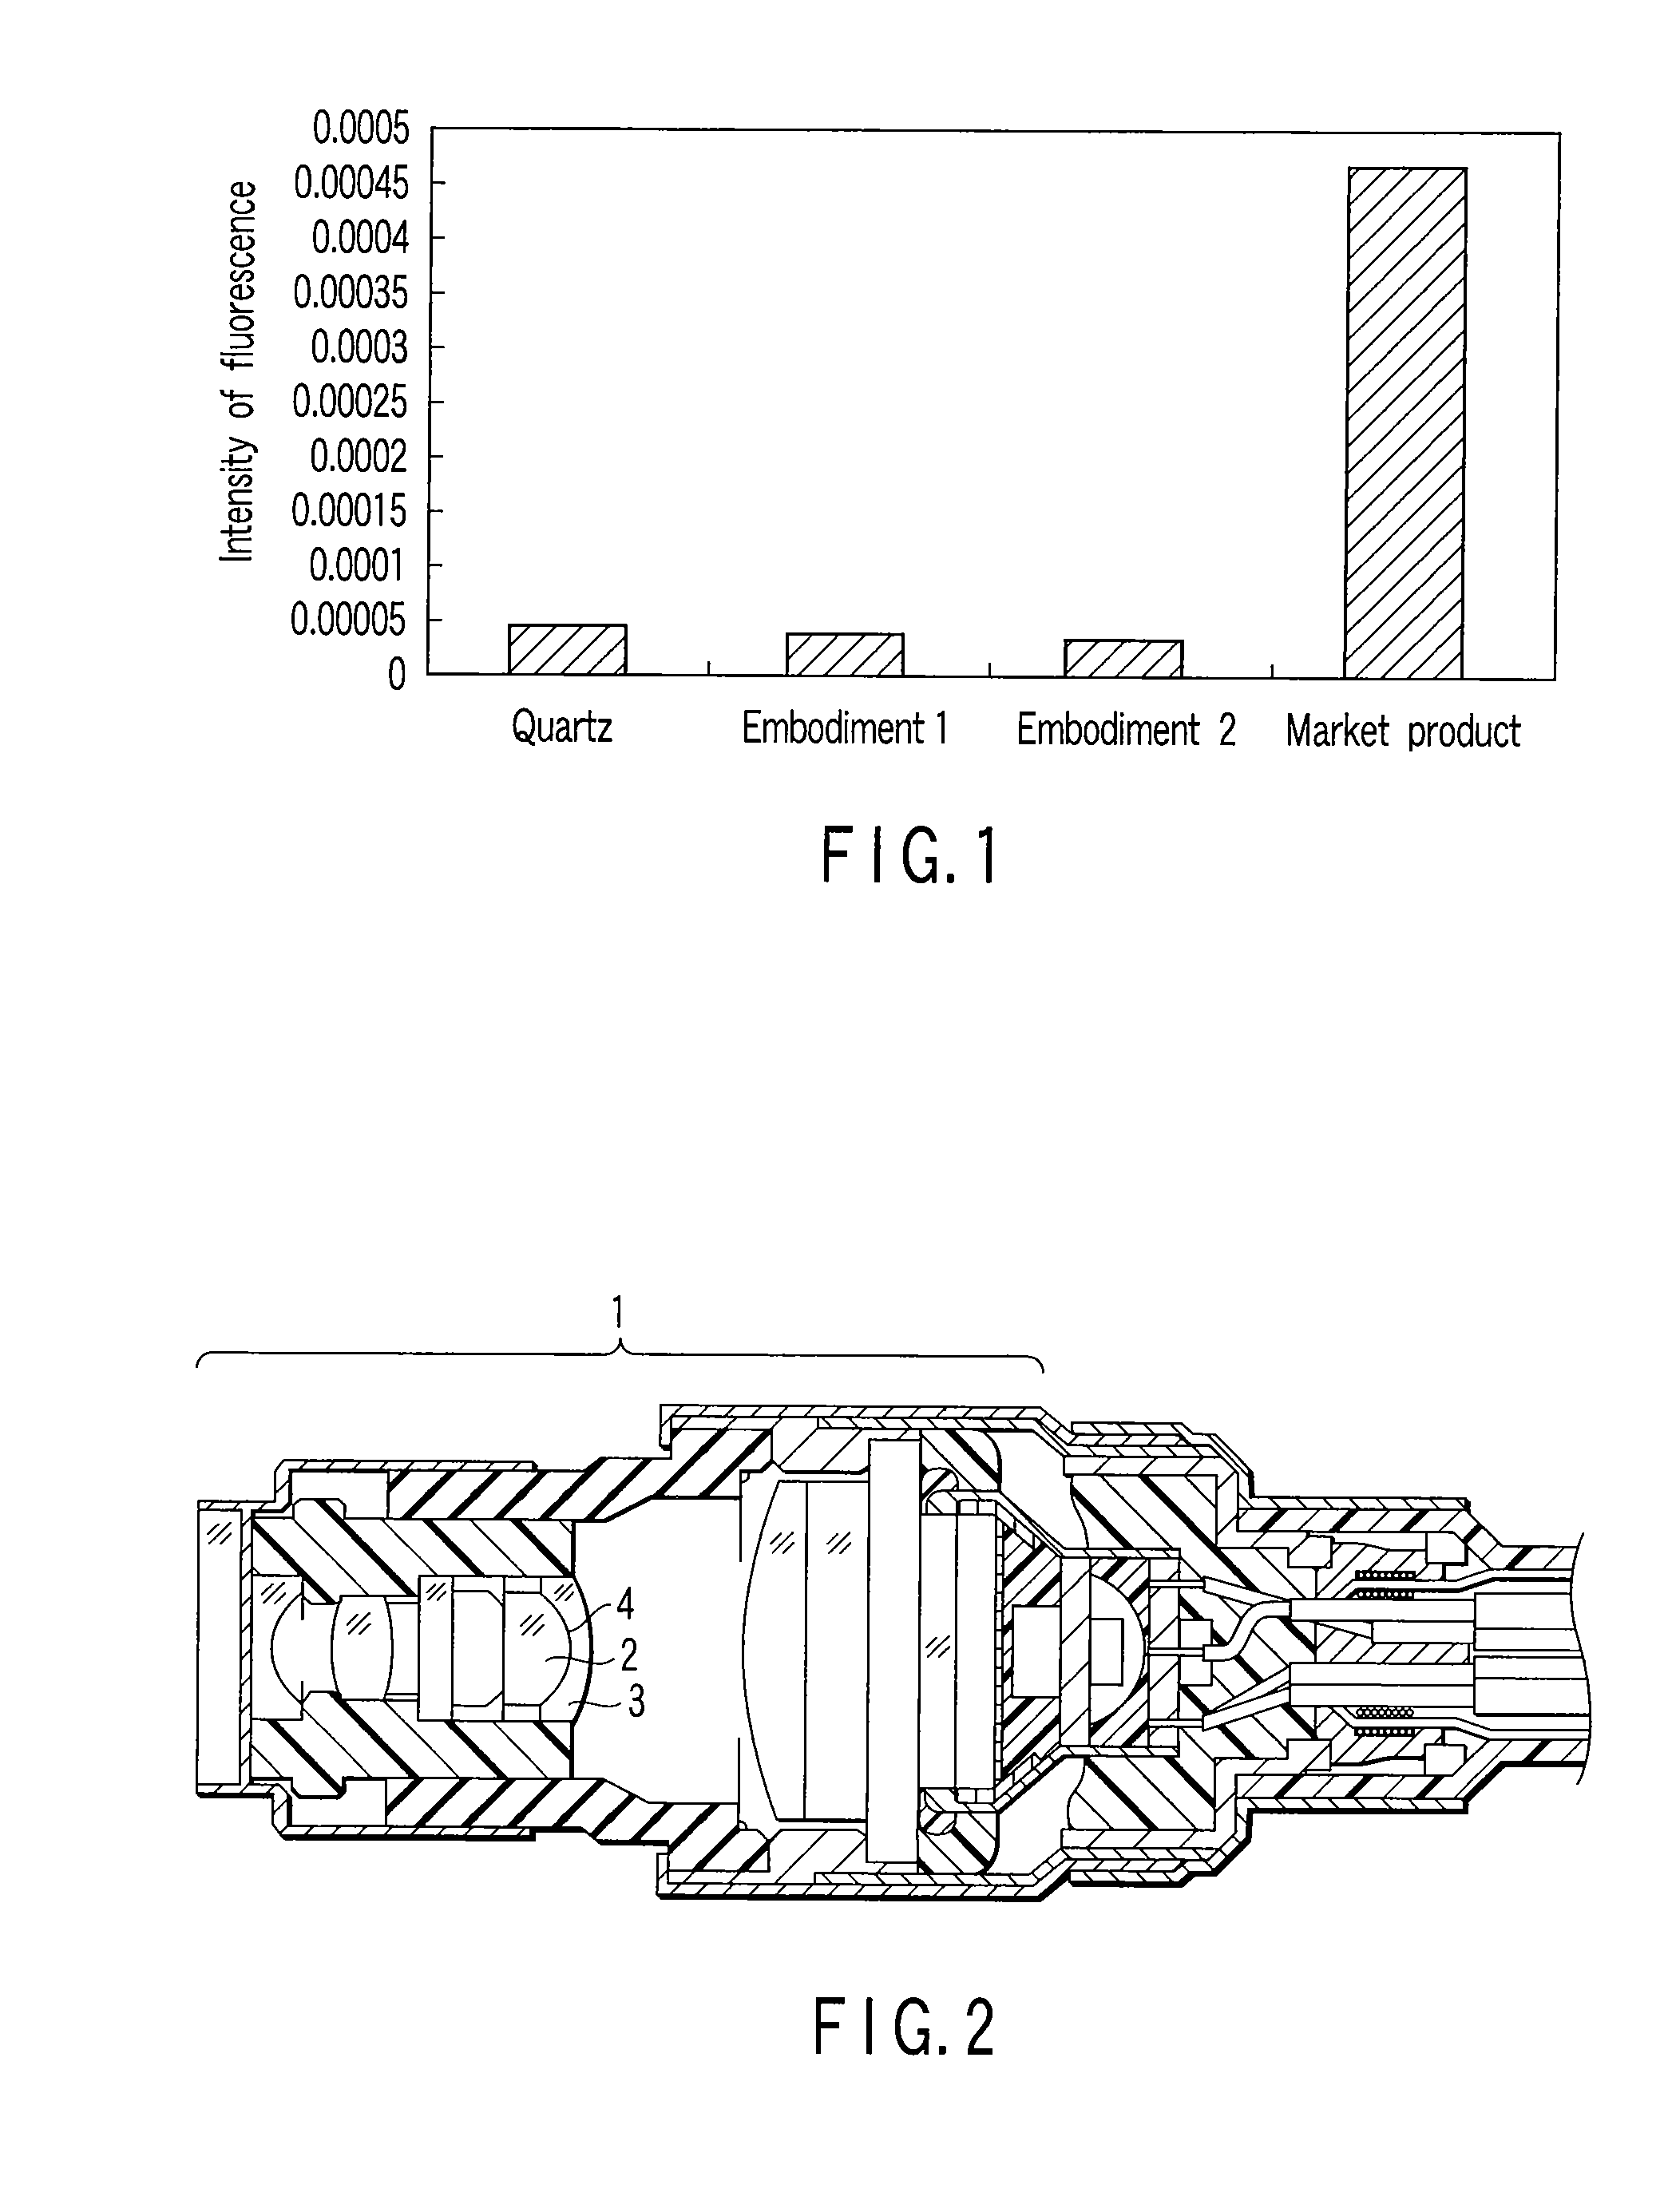 Optical device for fluorescence imaging